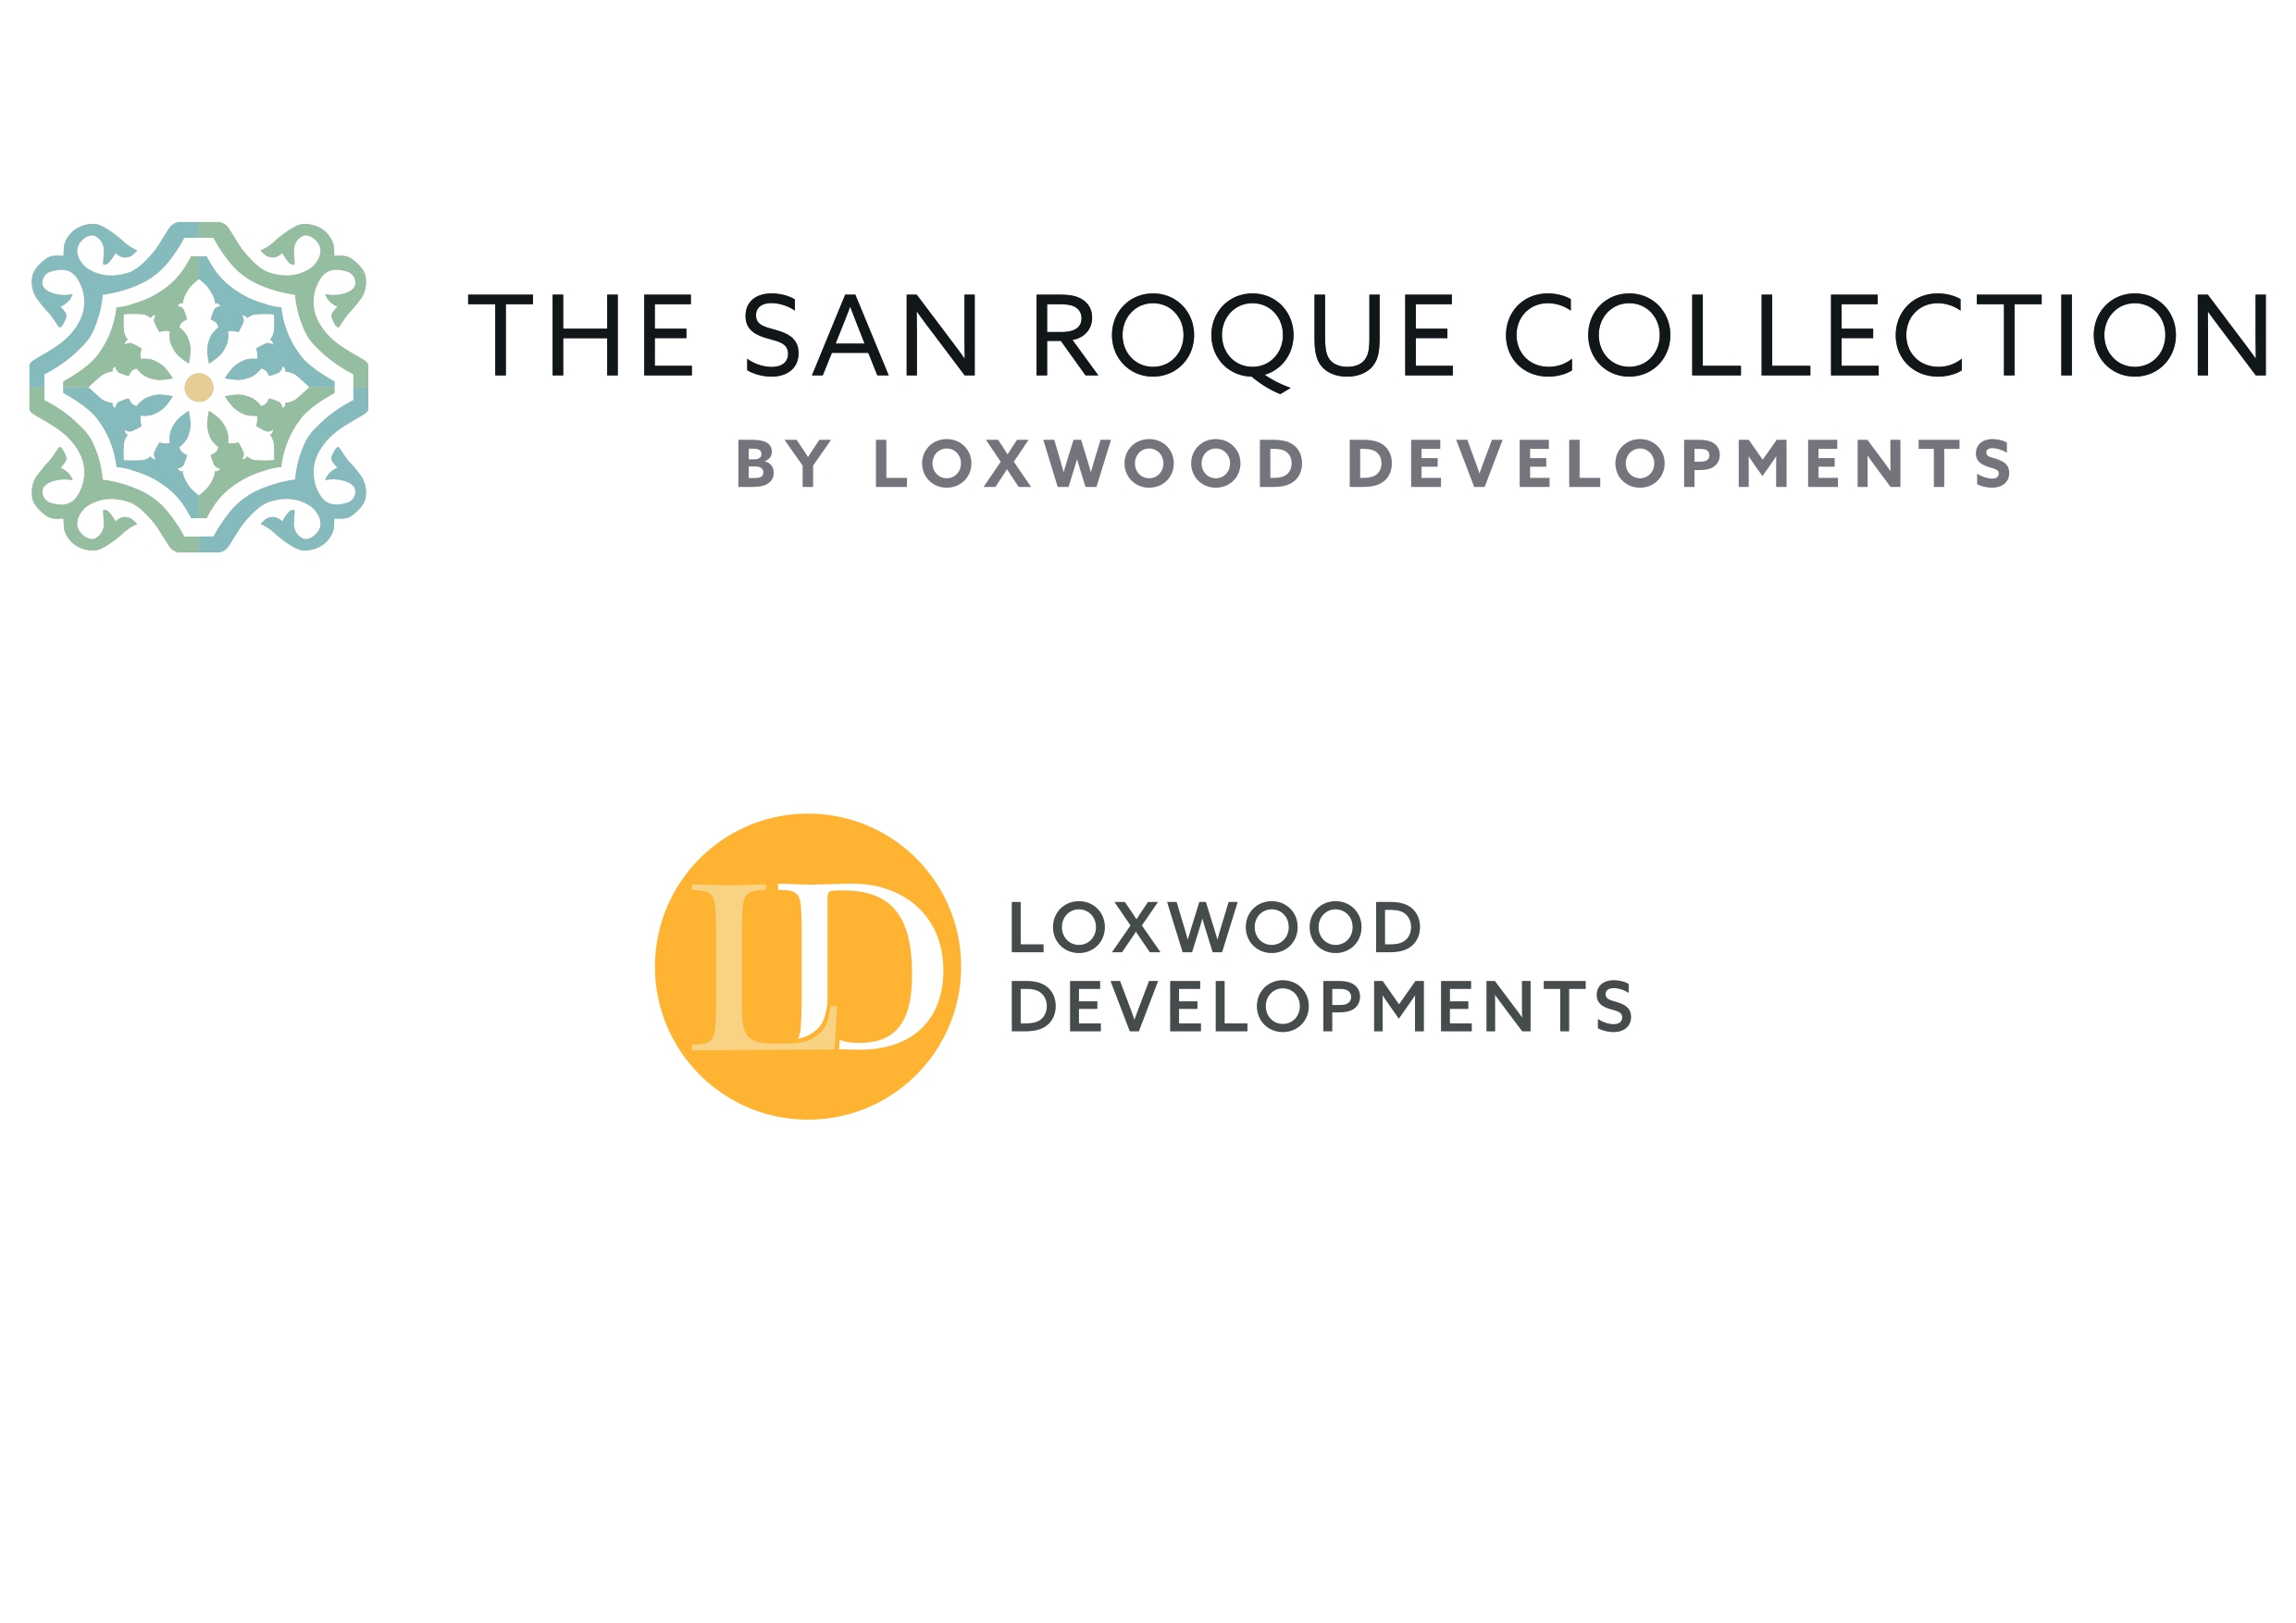 San Roque Collection & Loxwood logo_page-0001